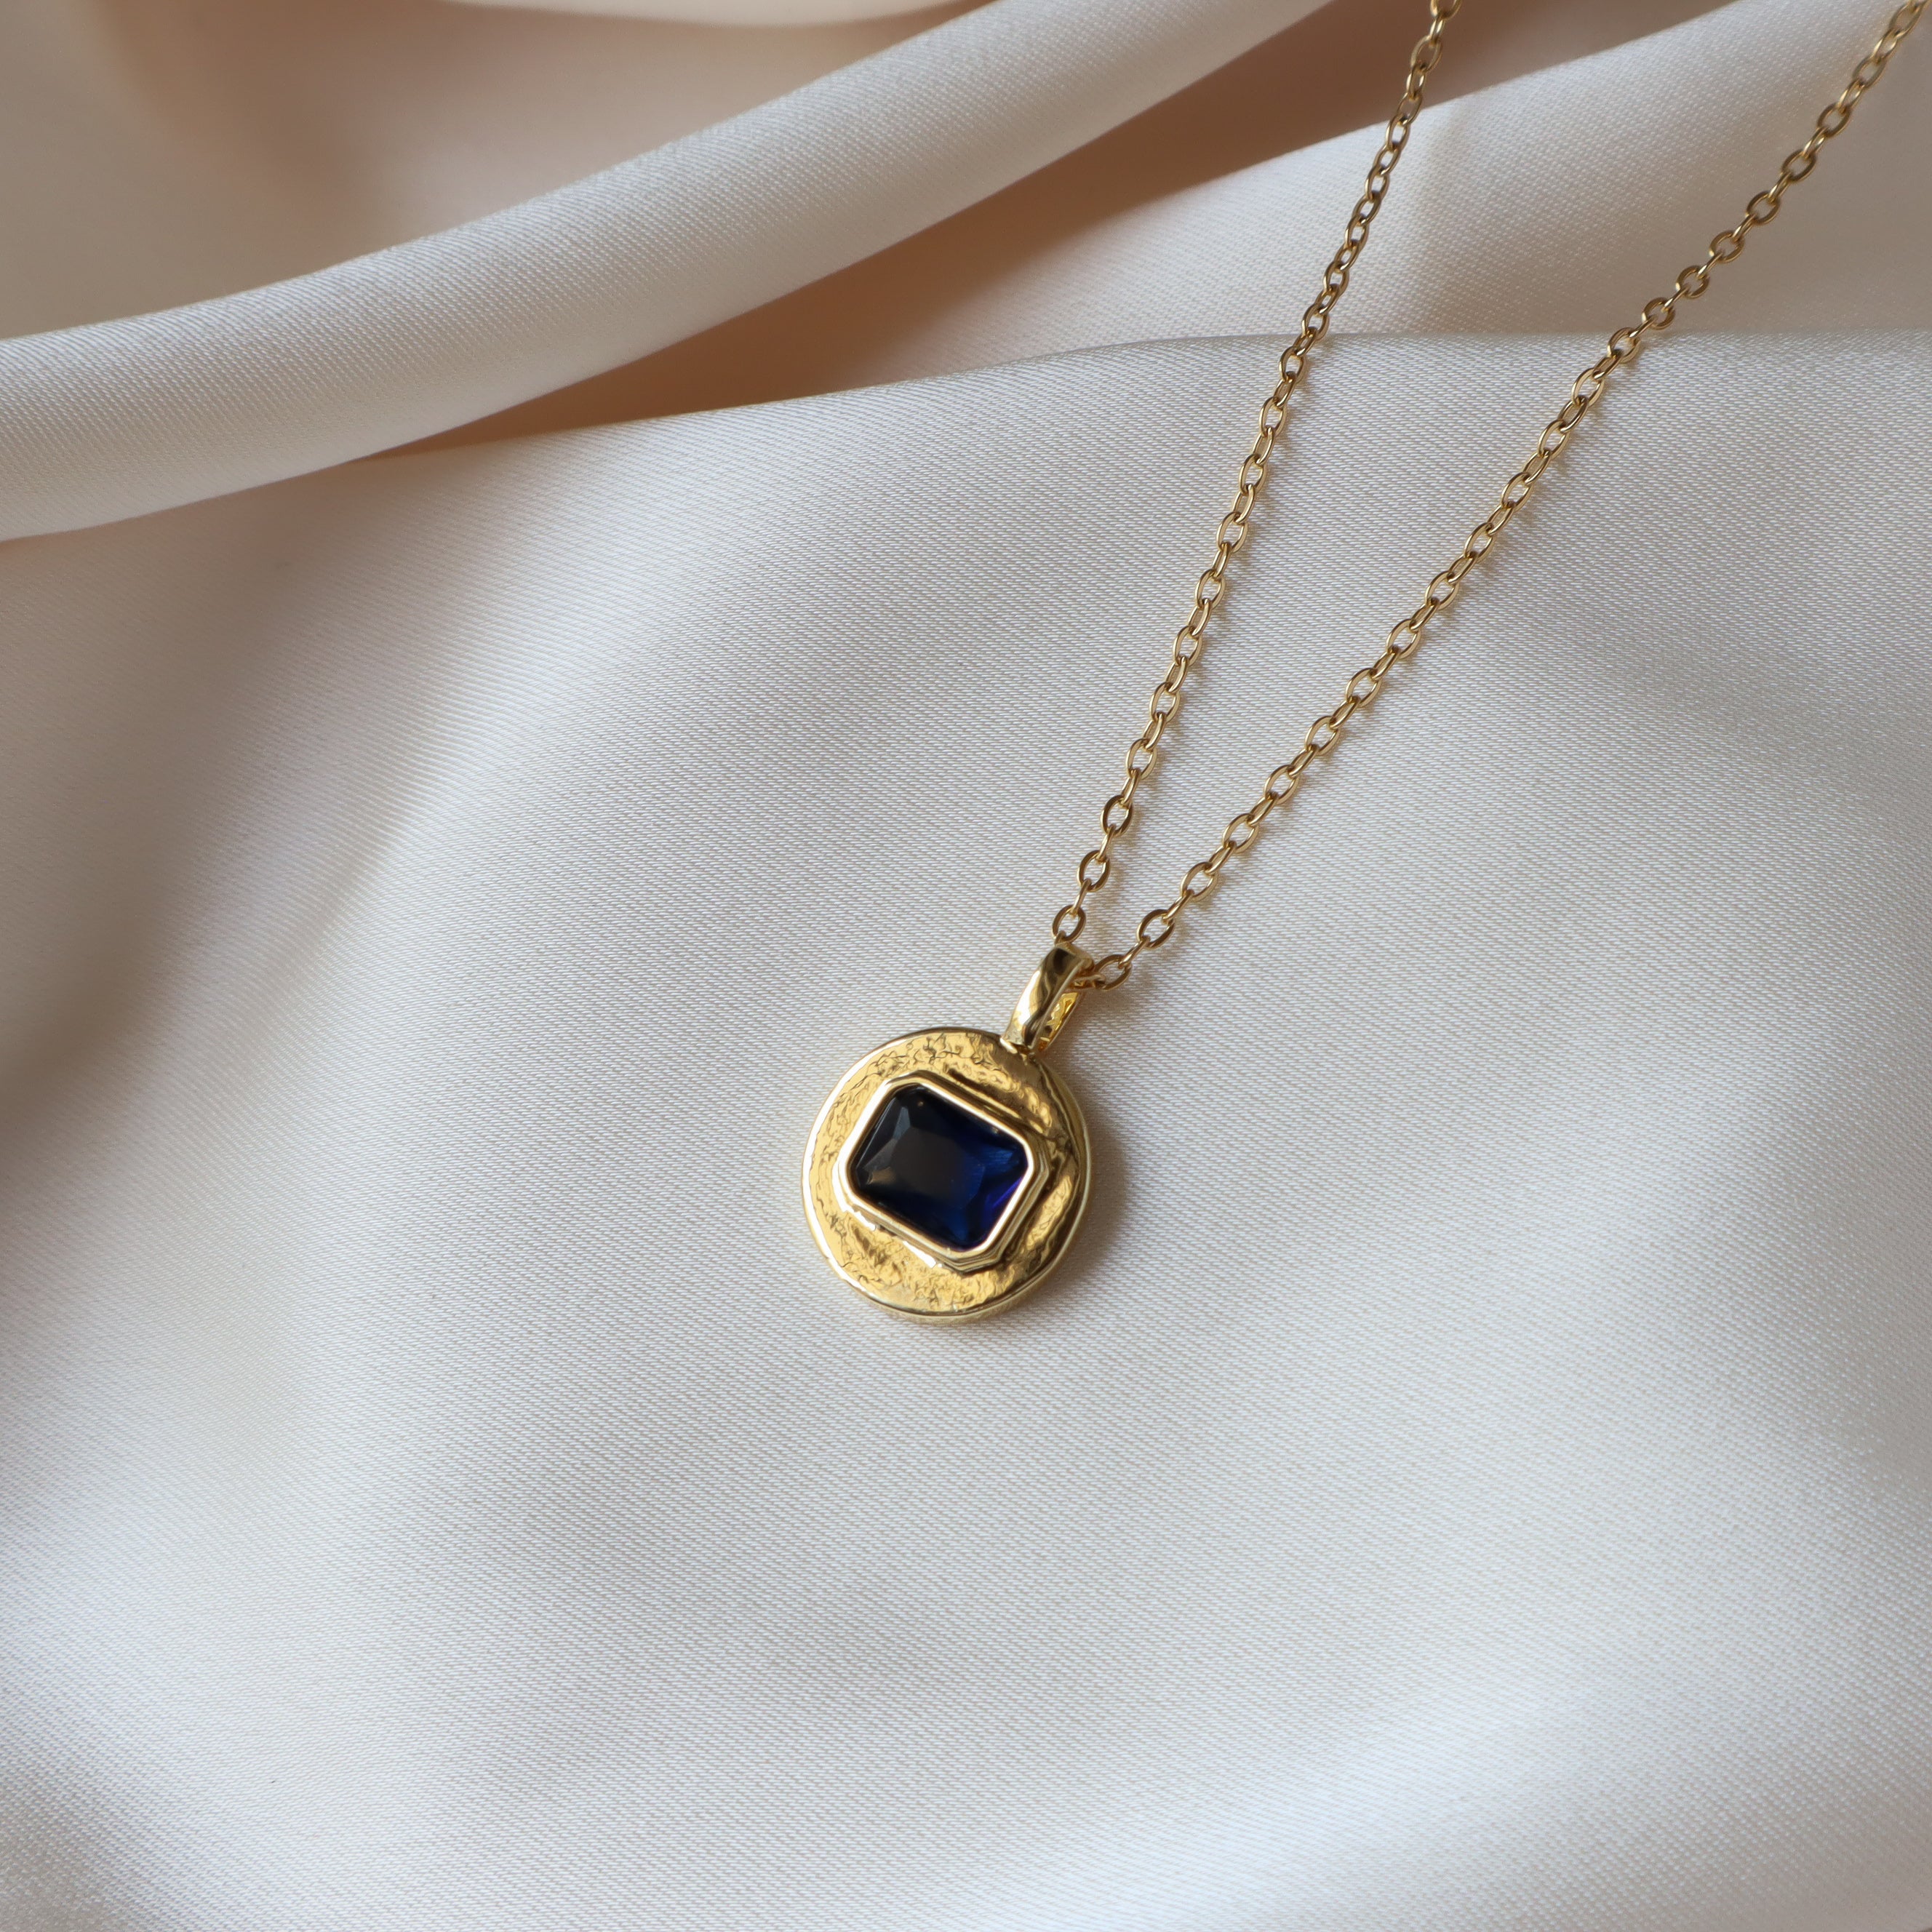 Gold Disc with Blue Stone Necklace